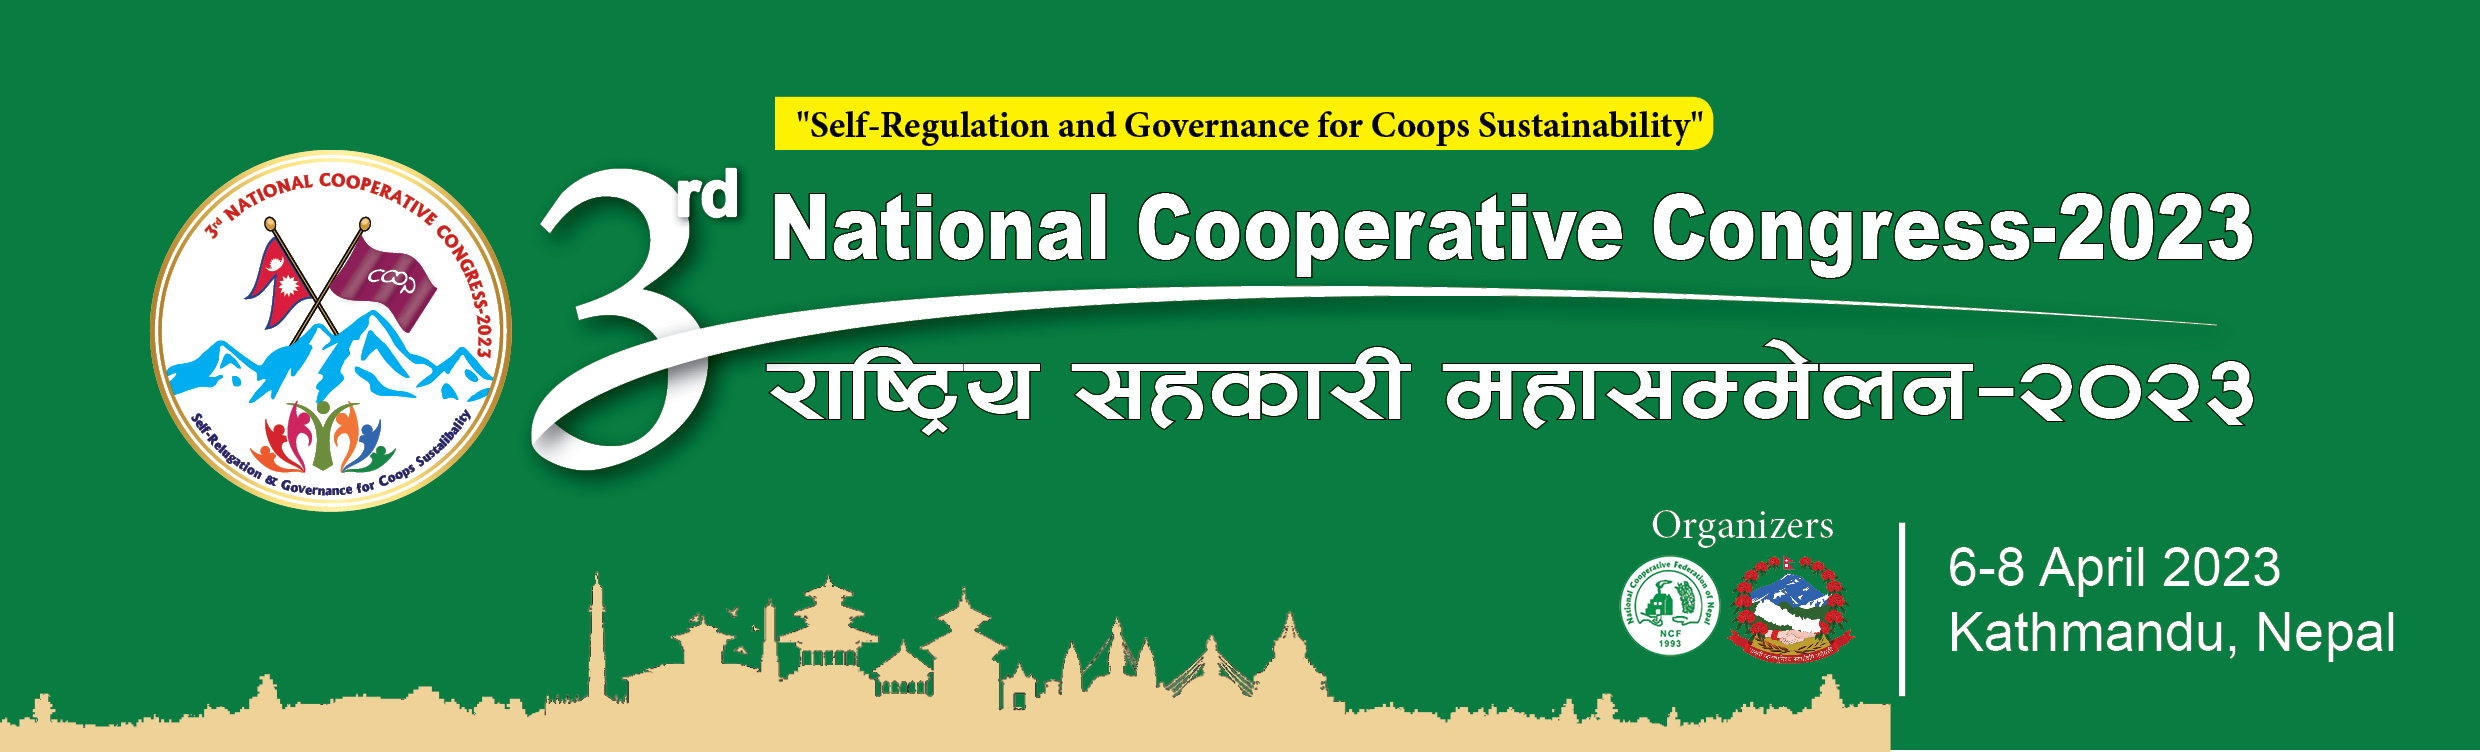 Coop managers national conference concludes issuing 12point